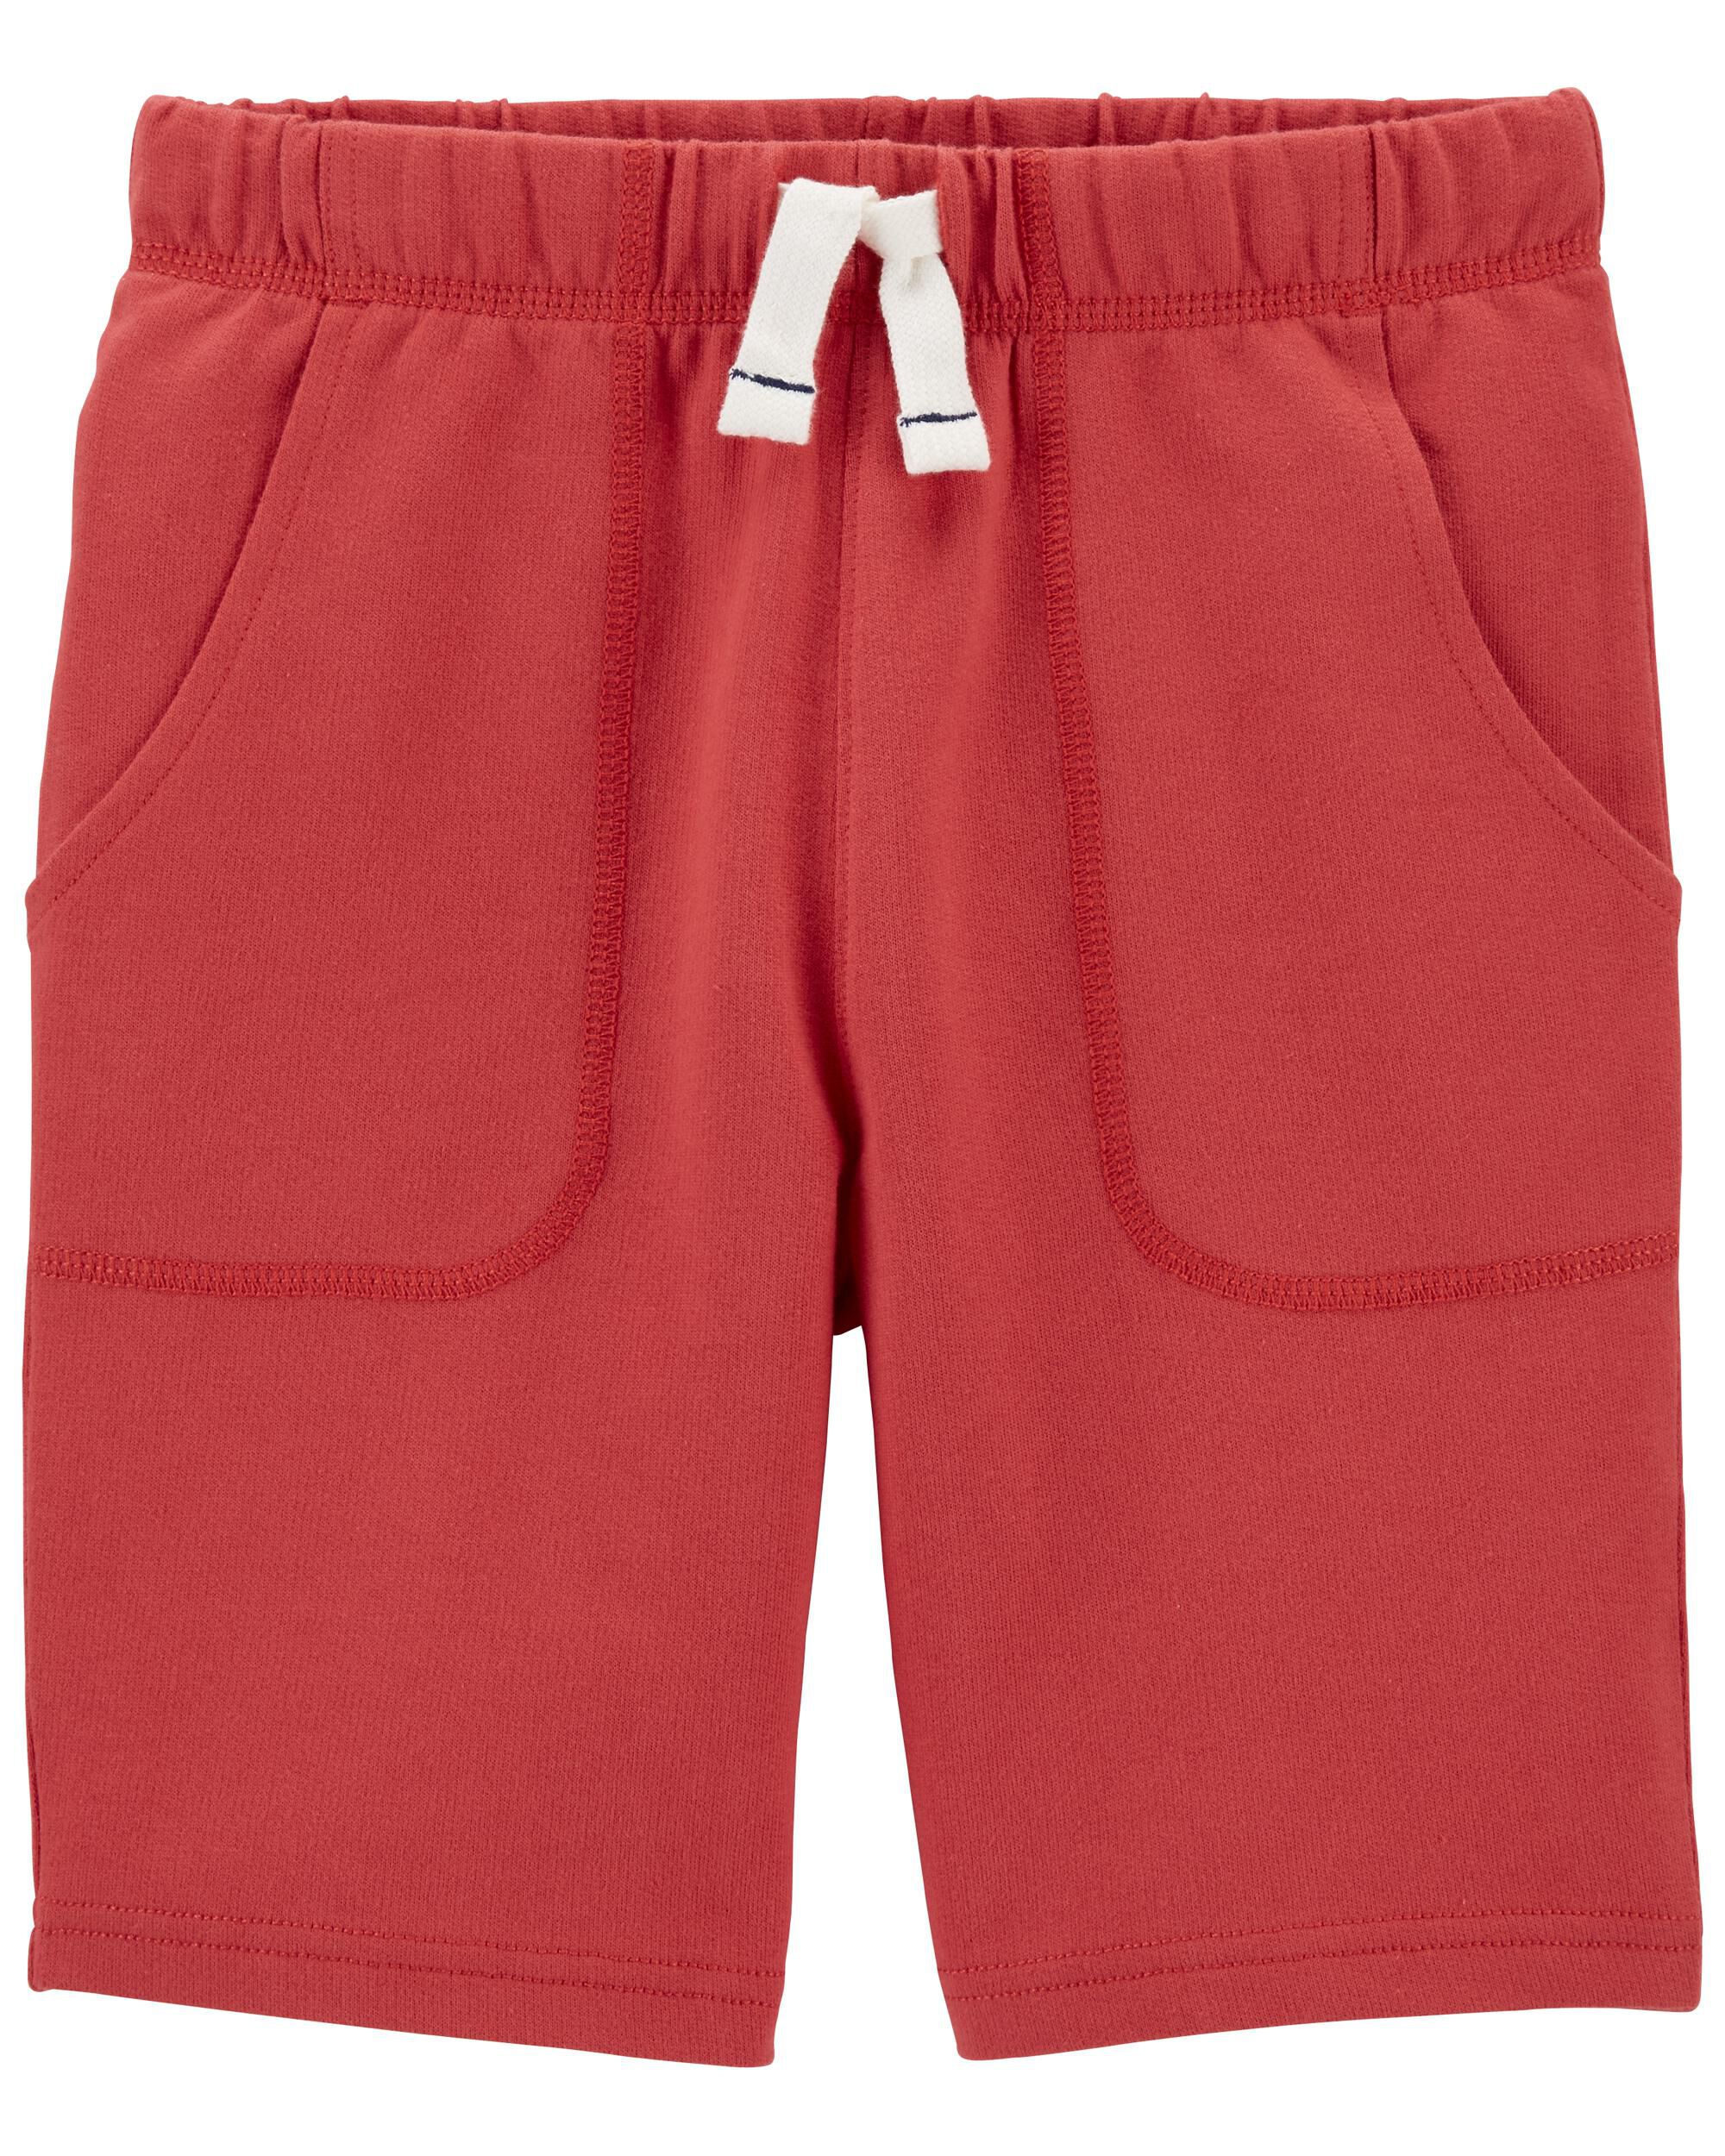 New Carter's Boy Pull-On Knit Shorts Toddler Kid boy 